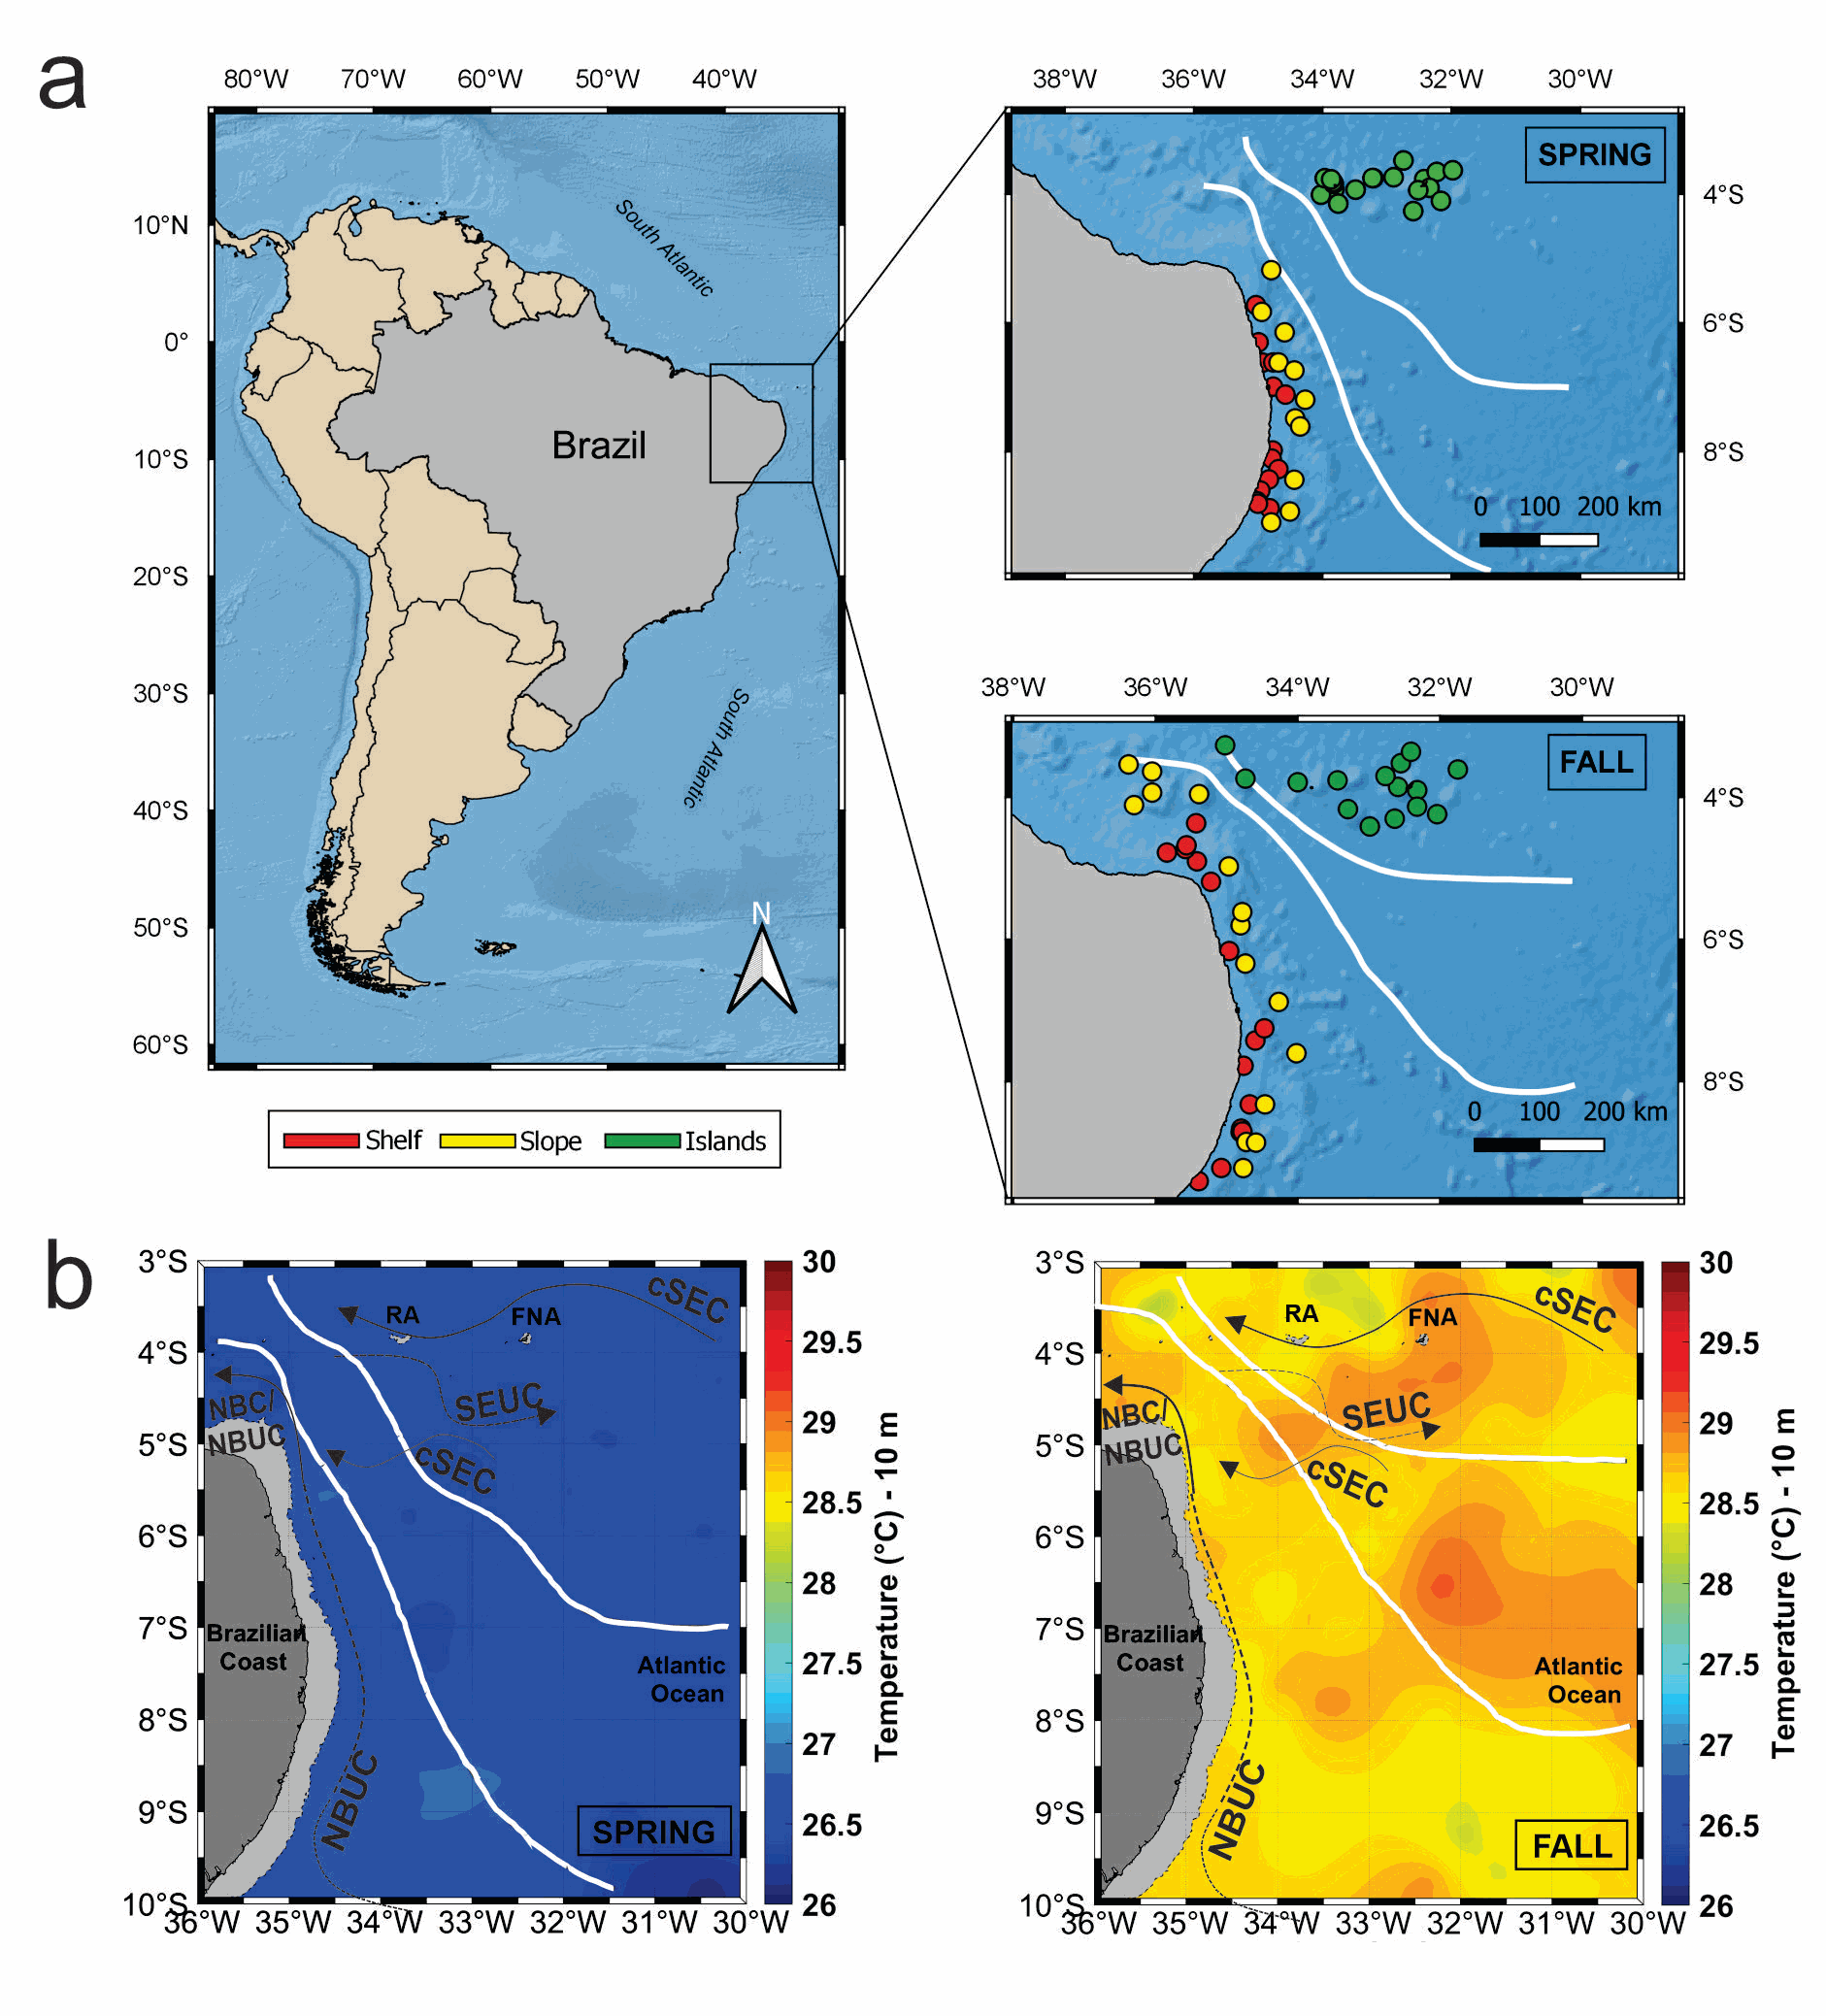 Phytoplankton pigment data collected during the ABRACOS 1 and 2 surveys performed along the northeast Brazilian continental shelf, slope and open ocean